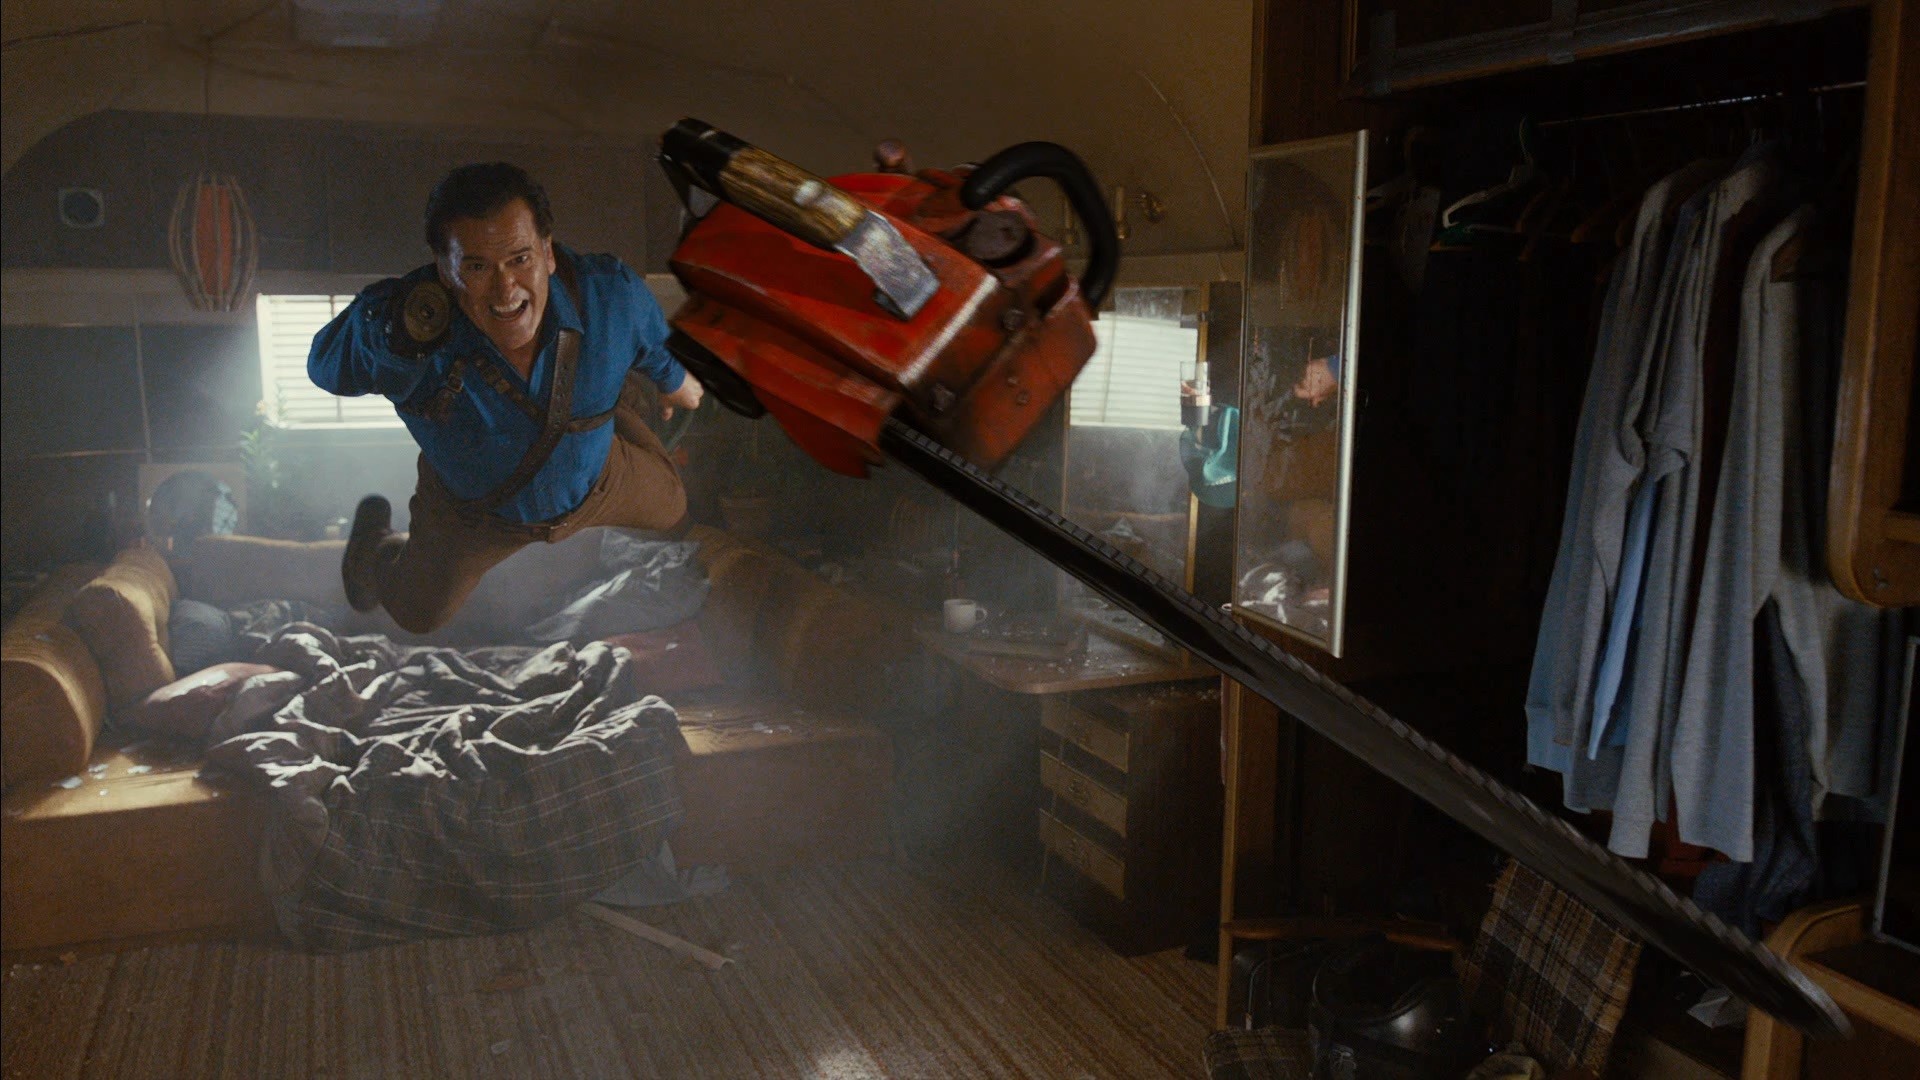 1920x1080 Ash vs. Evil Dead: The Complete First Season (Blu-ray) : DVD Talk Review of  the Blu-ray